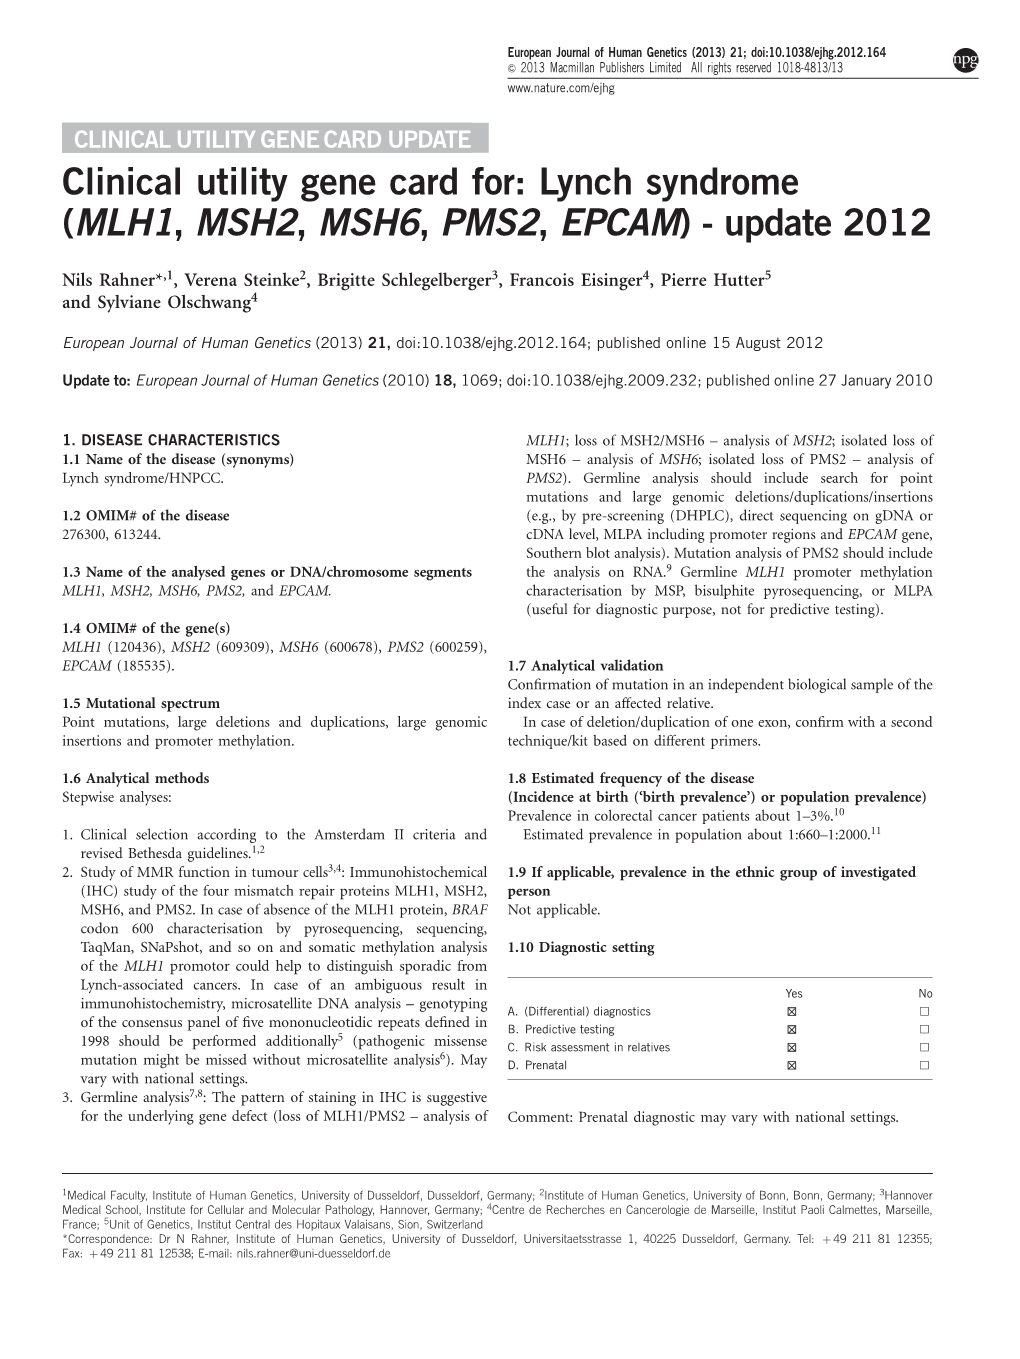 Lynch Syndrome (MLH1, MSH2, MSH6, PMS2, EPCAM) - Update 2012